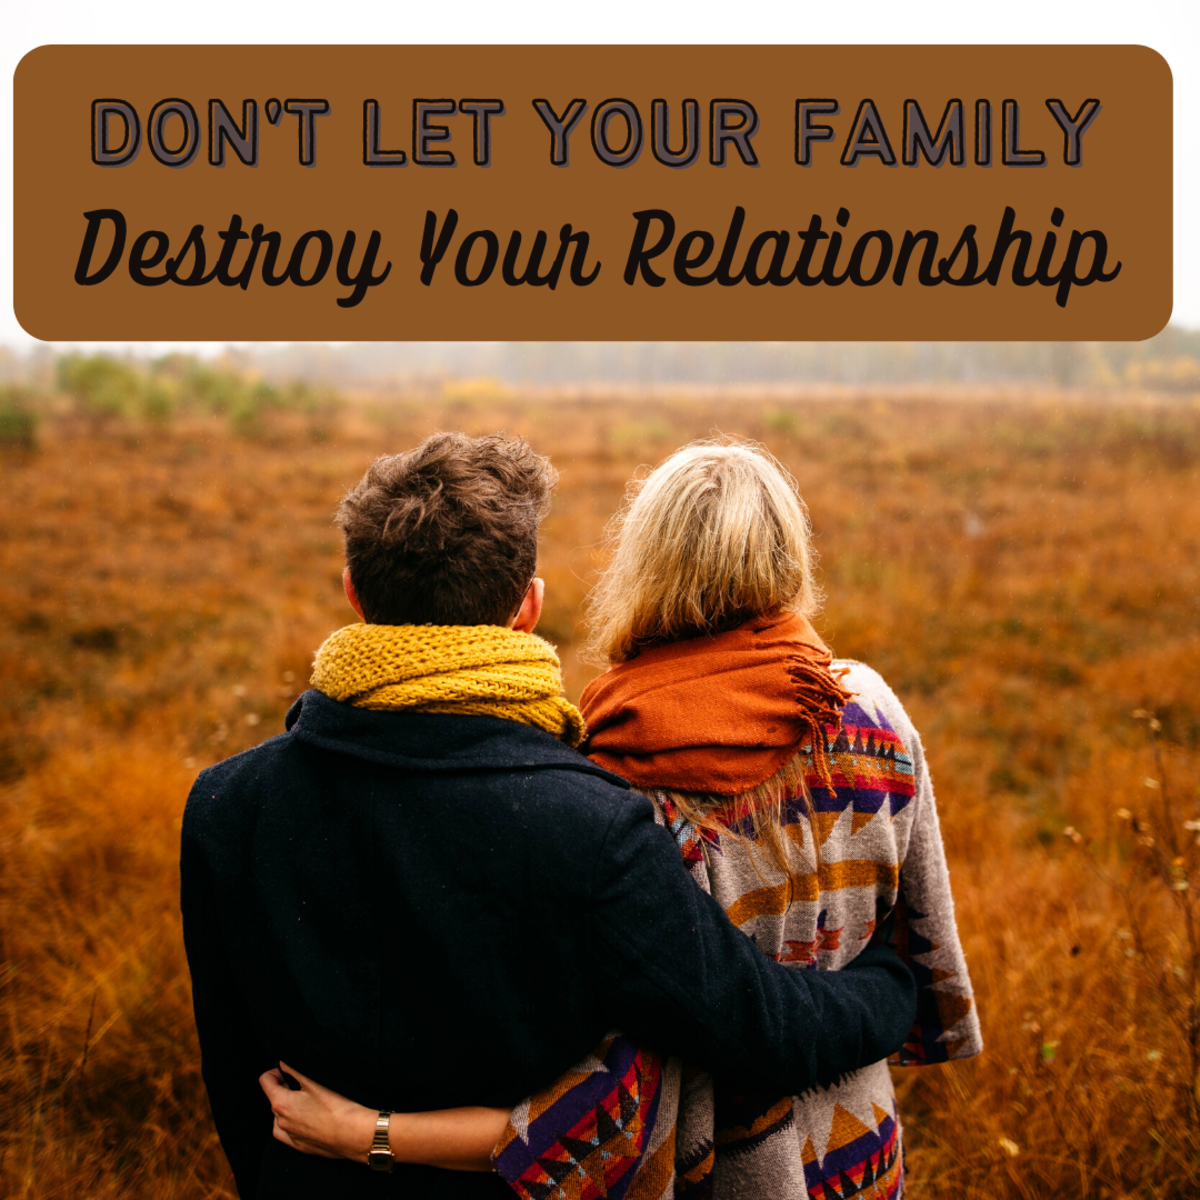 Tips for protecting your relationship from your family!